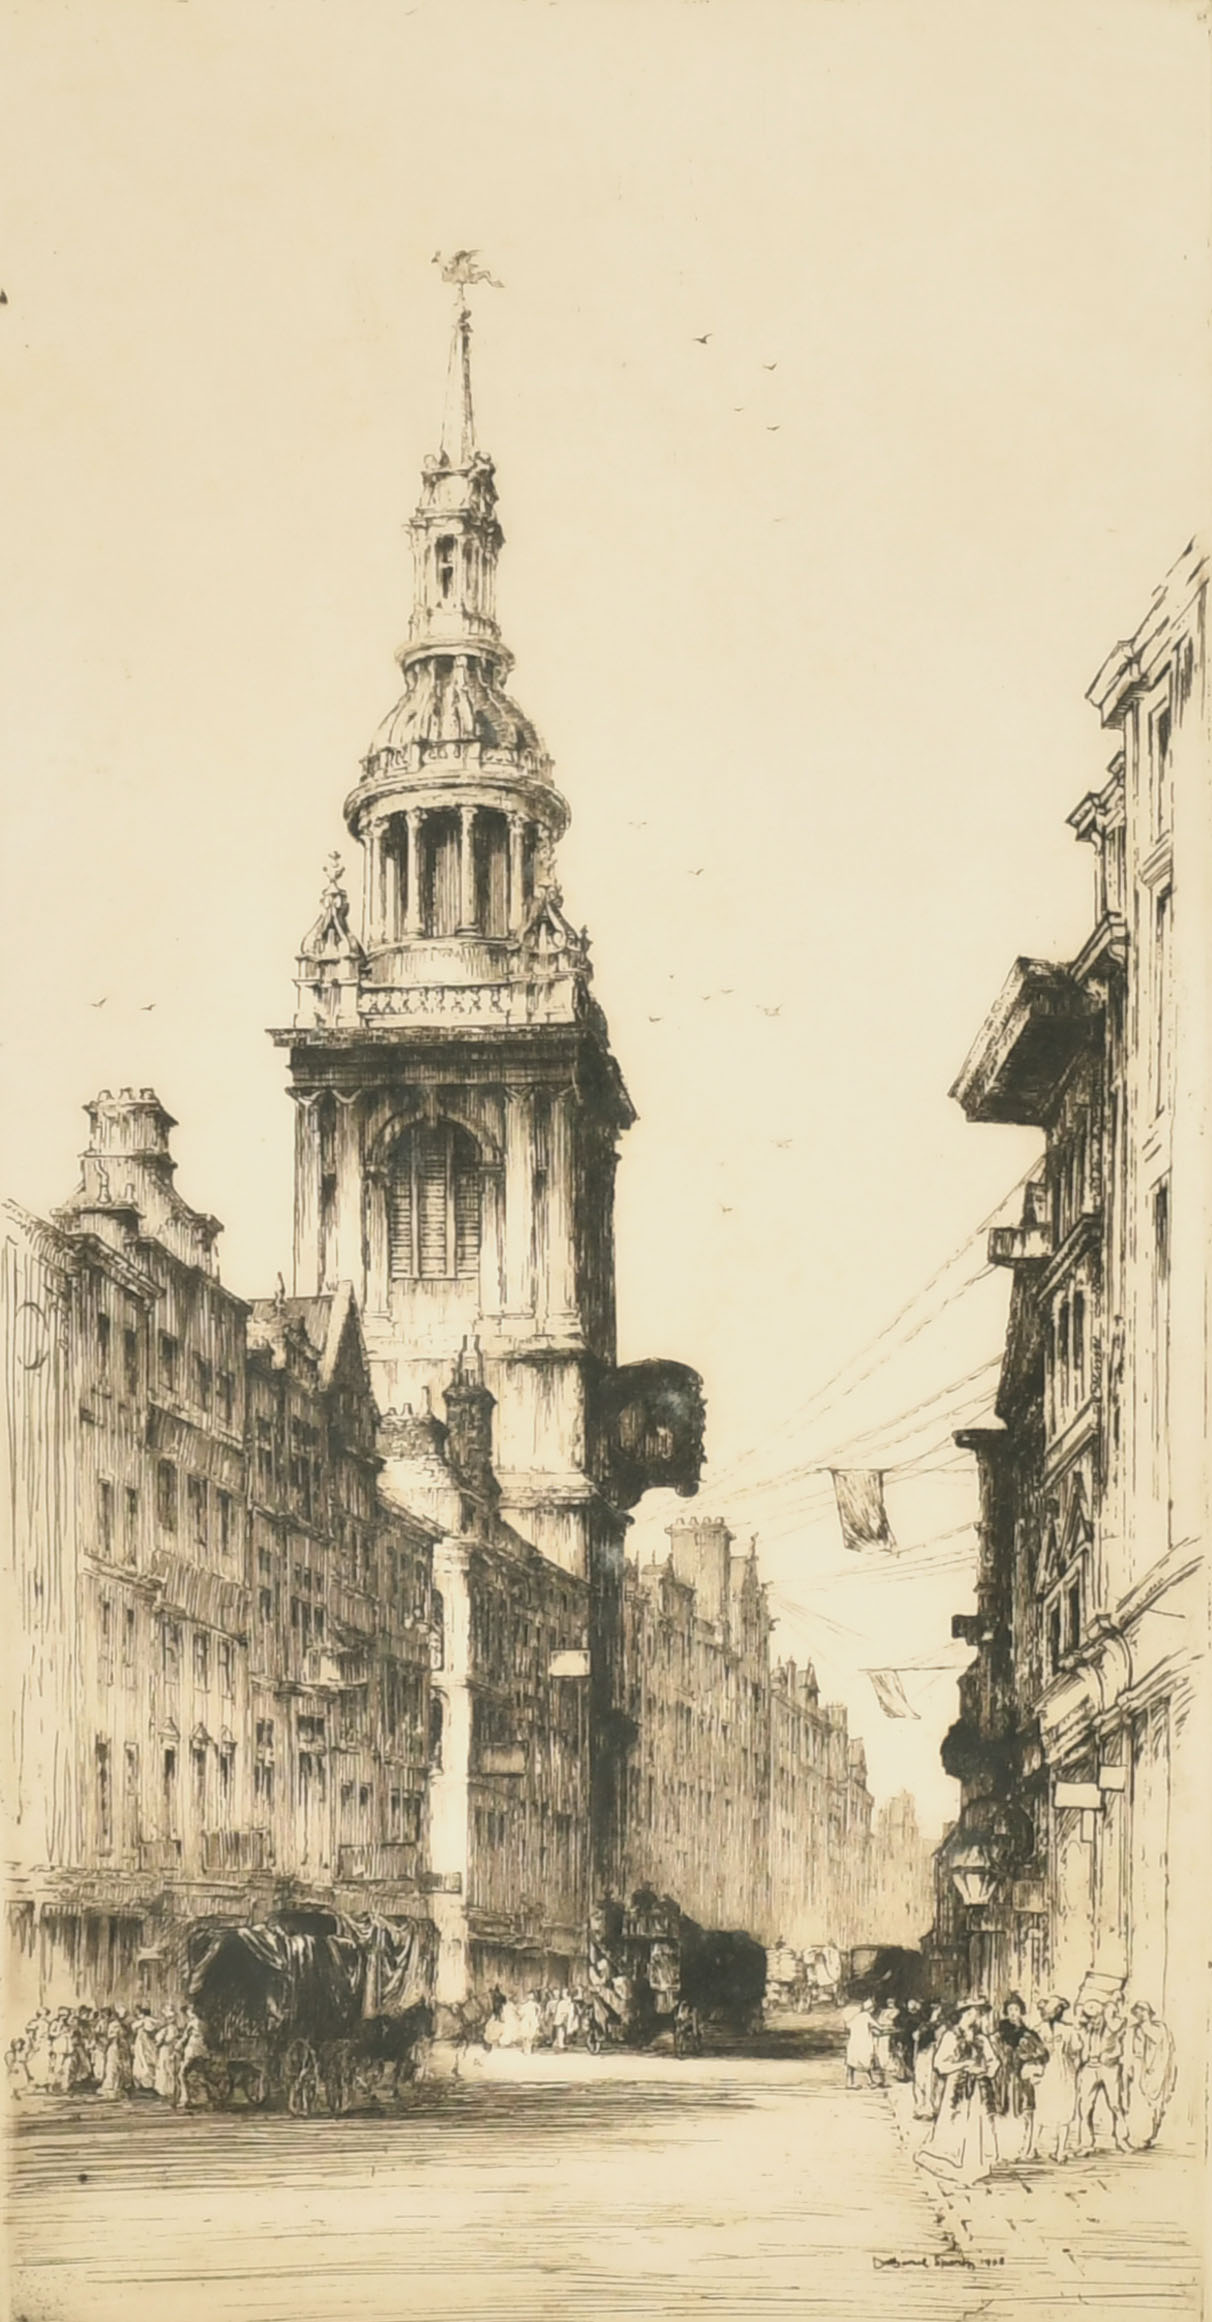 Nathaniel Sparks (1880-1957) British. "Bow Church, Cheapside", Etching, Signed in pencil, 15.25" x